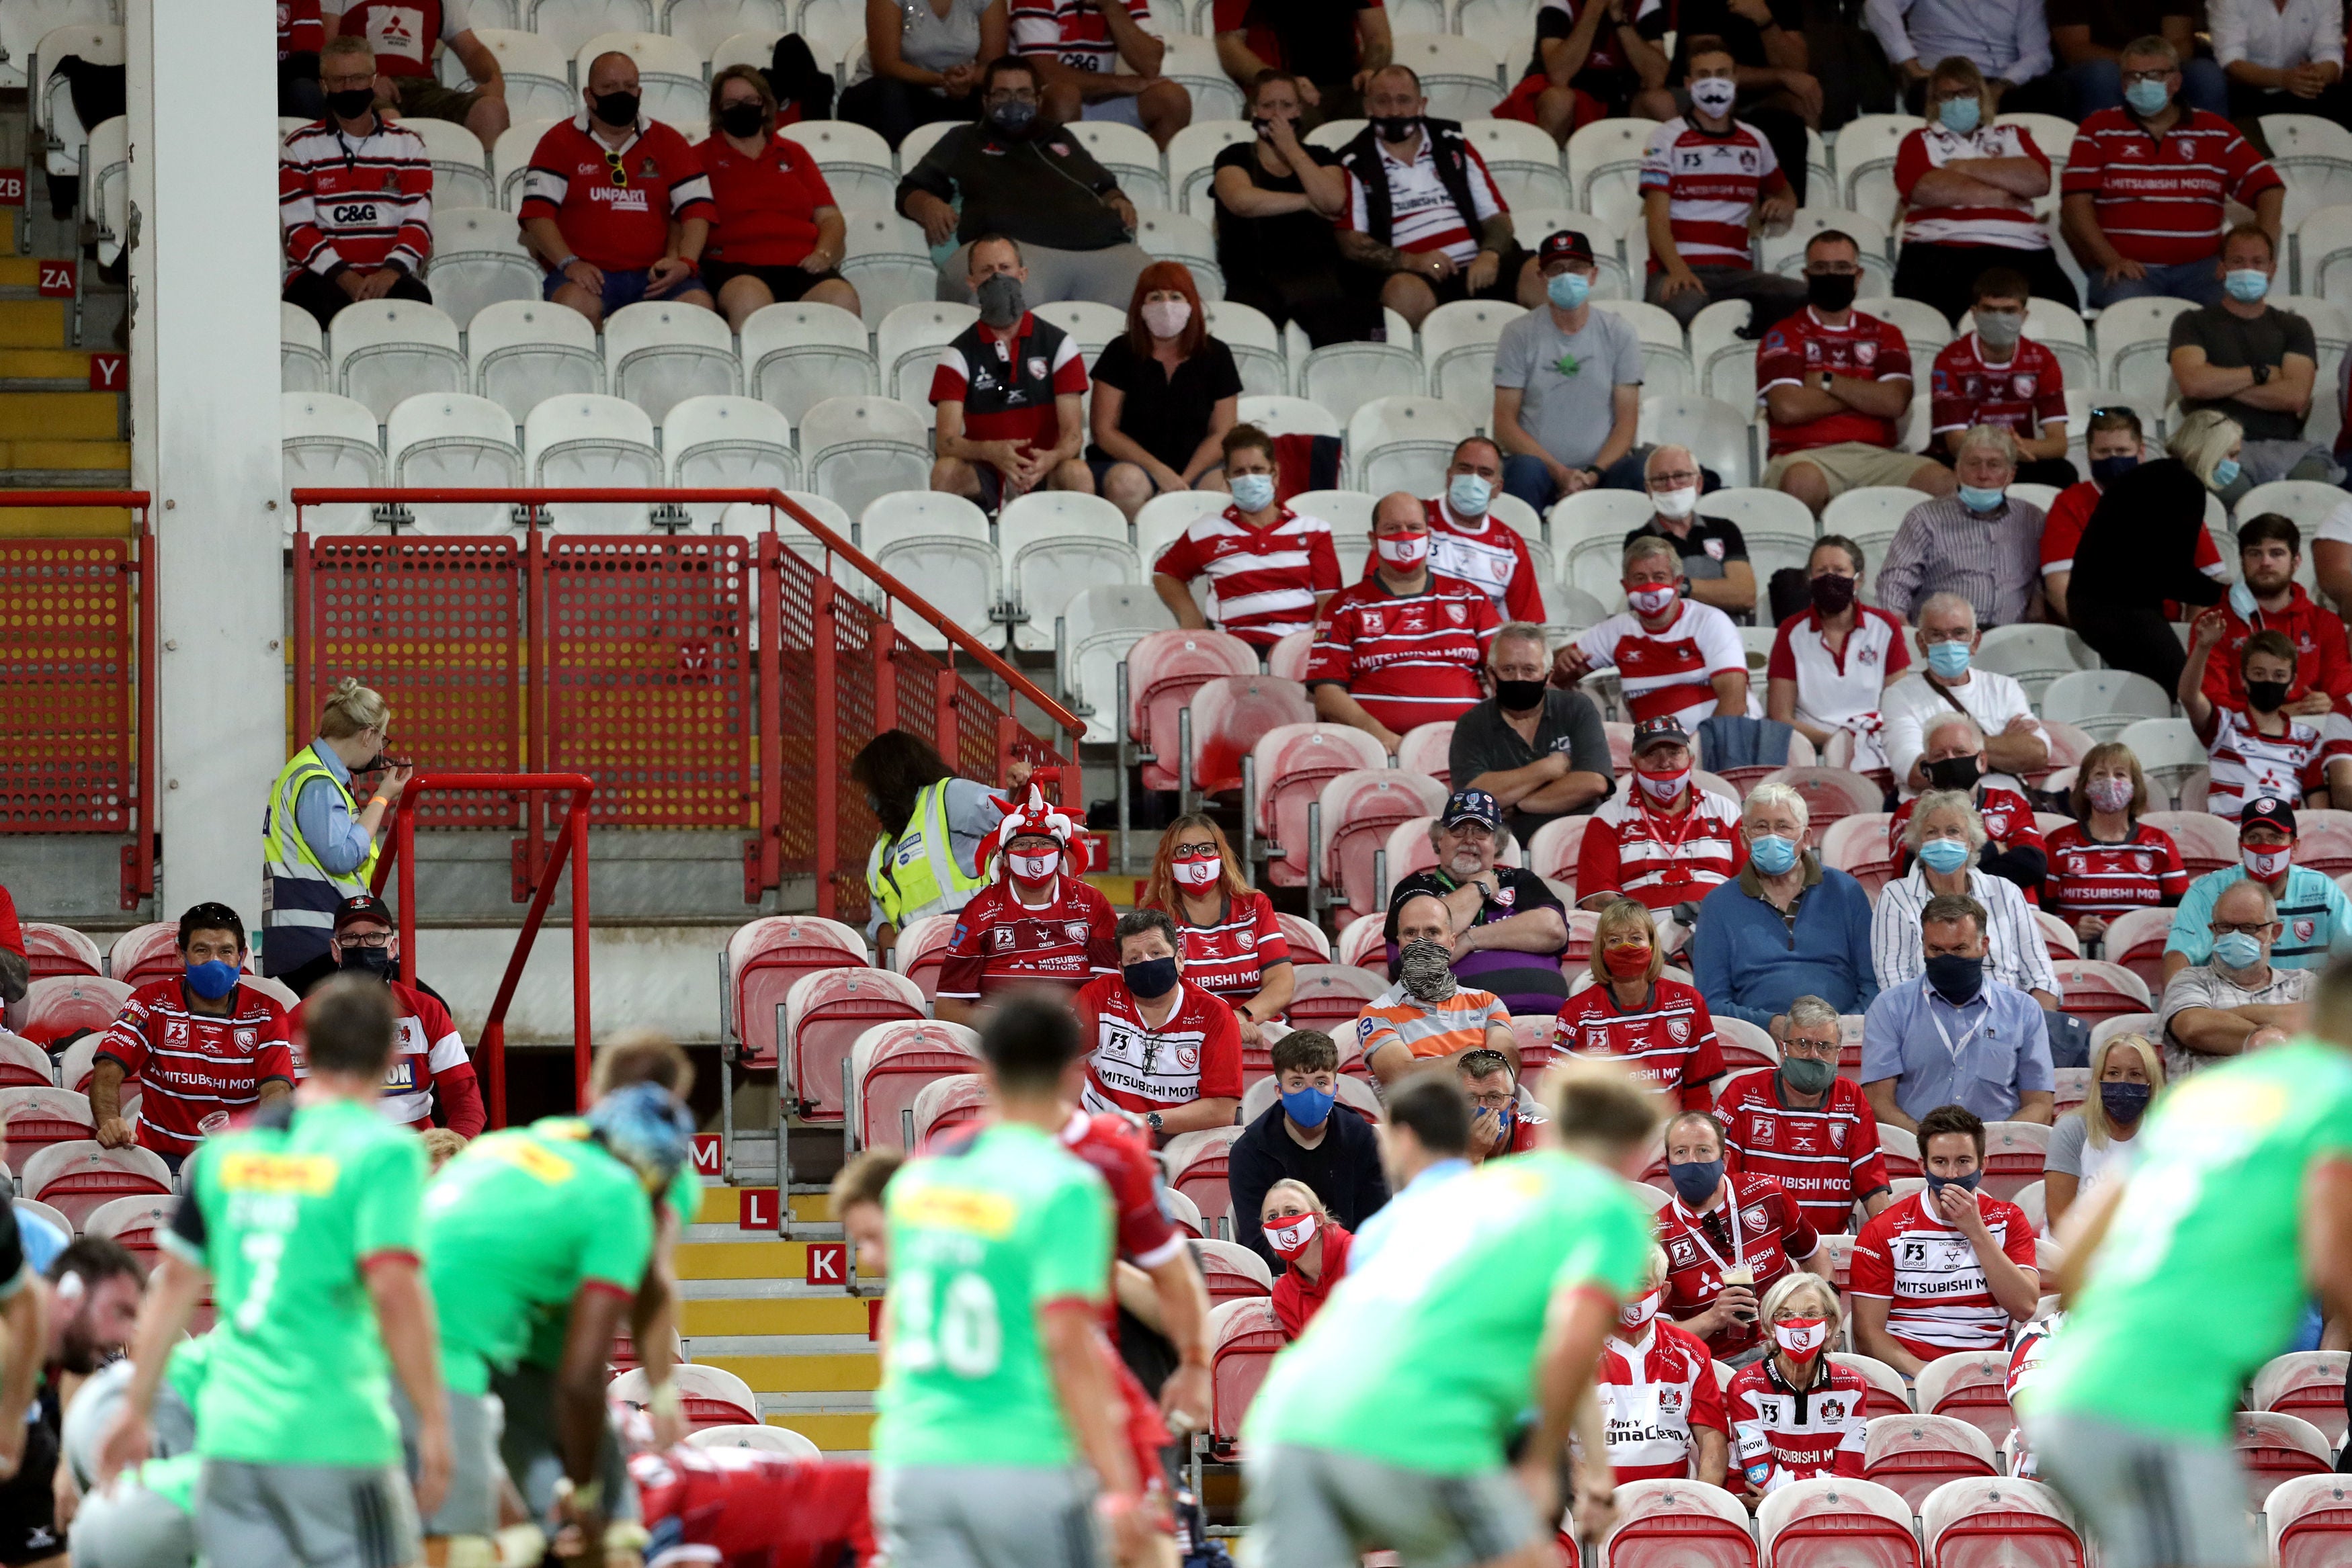 Gloucester will feature in another match with fans in attendance when they travel to Bath next week